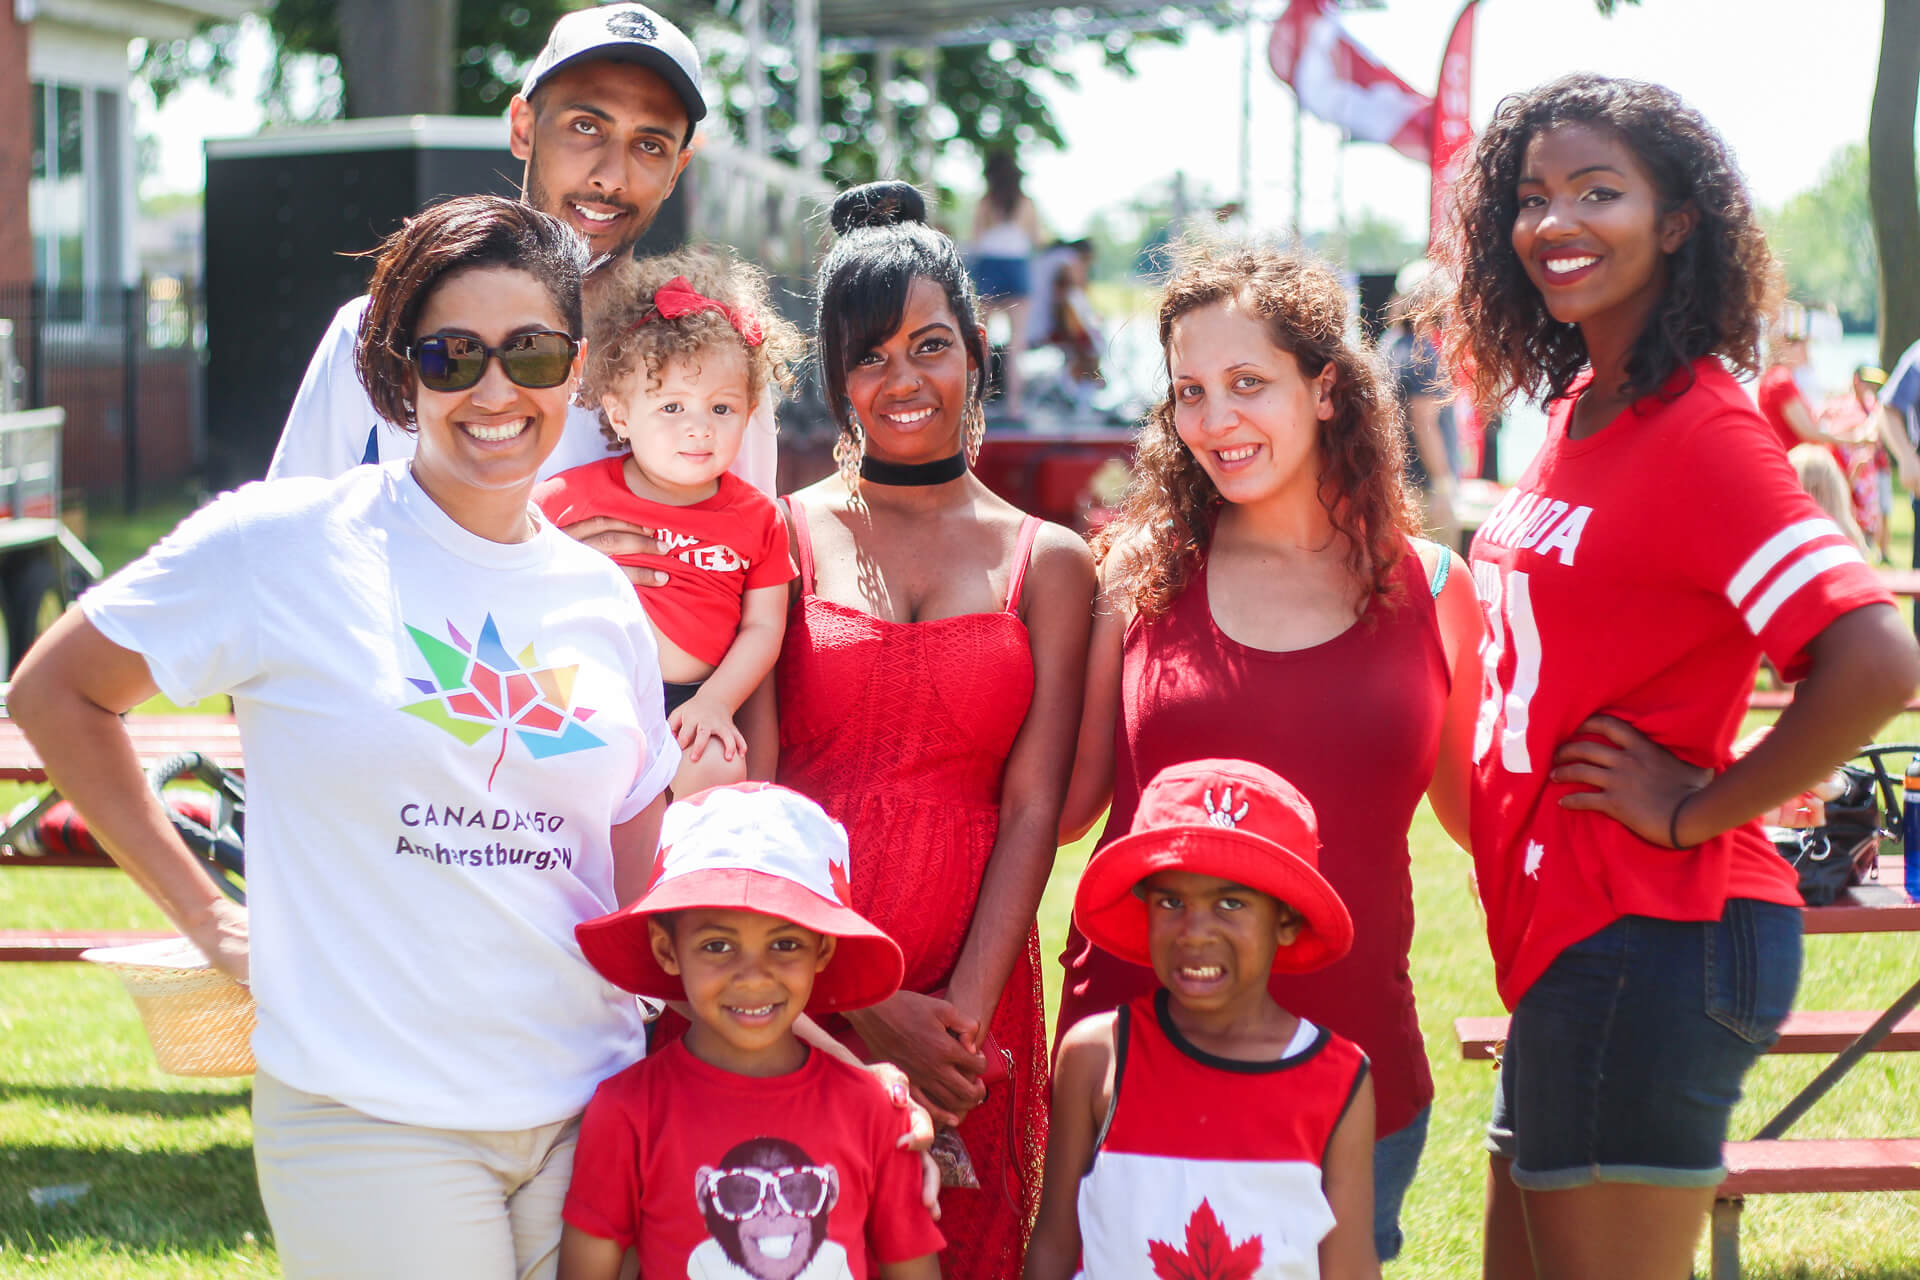 Friends and their children celebrating Canada Day.